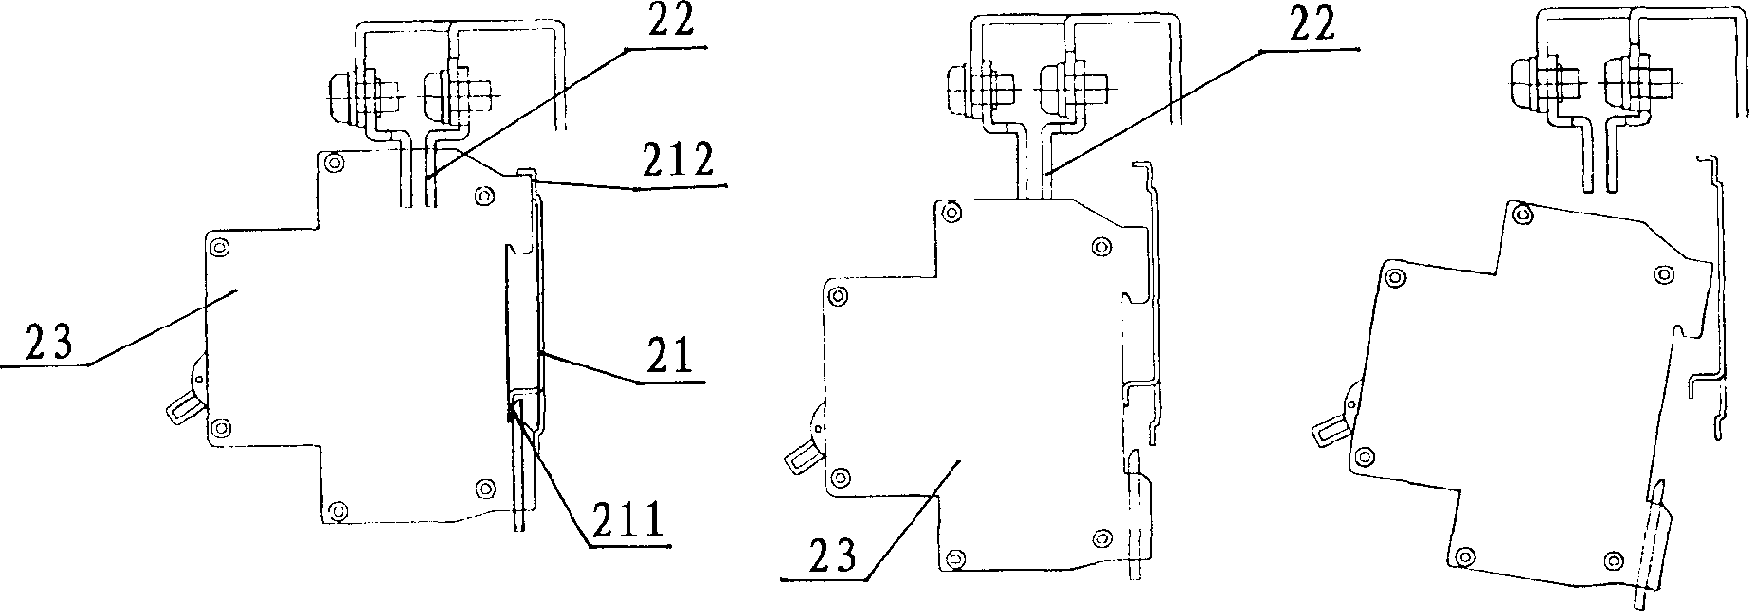 Guide way structure for installing switch of switchboard